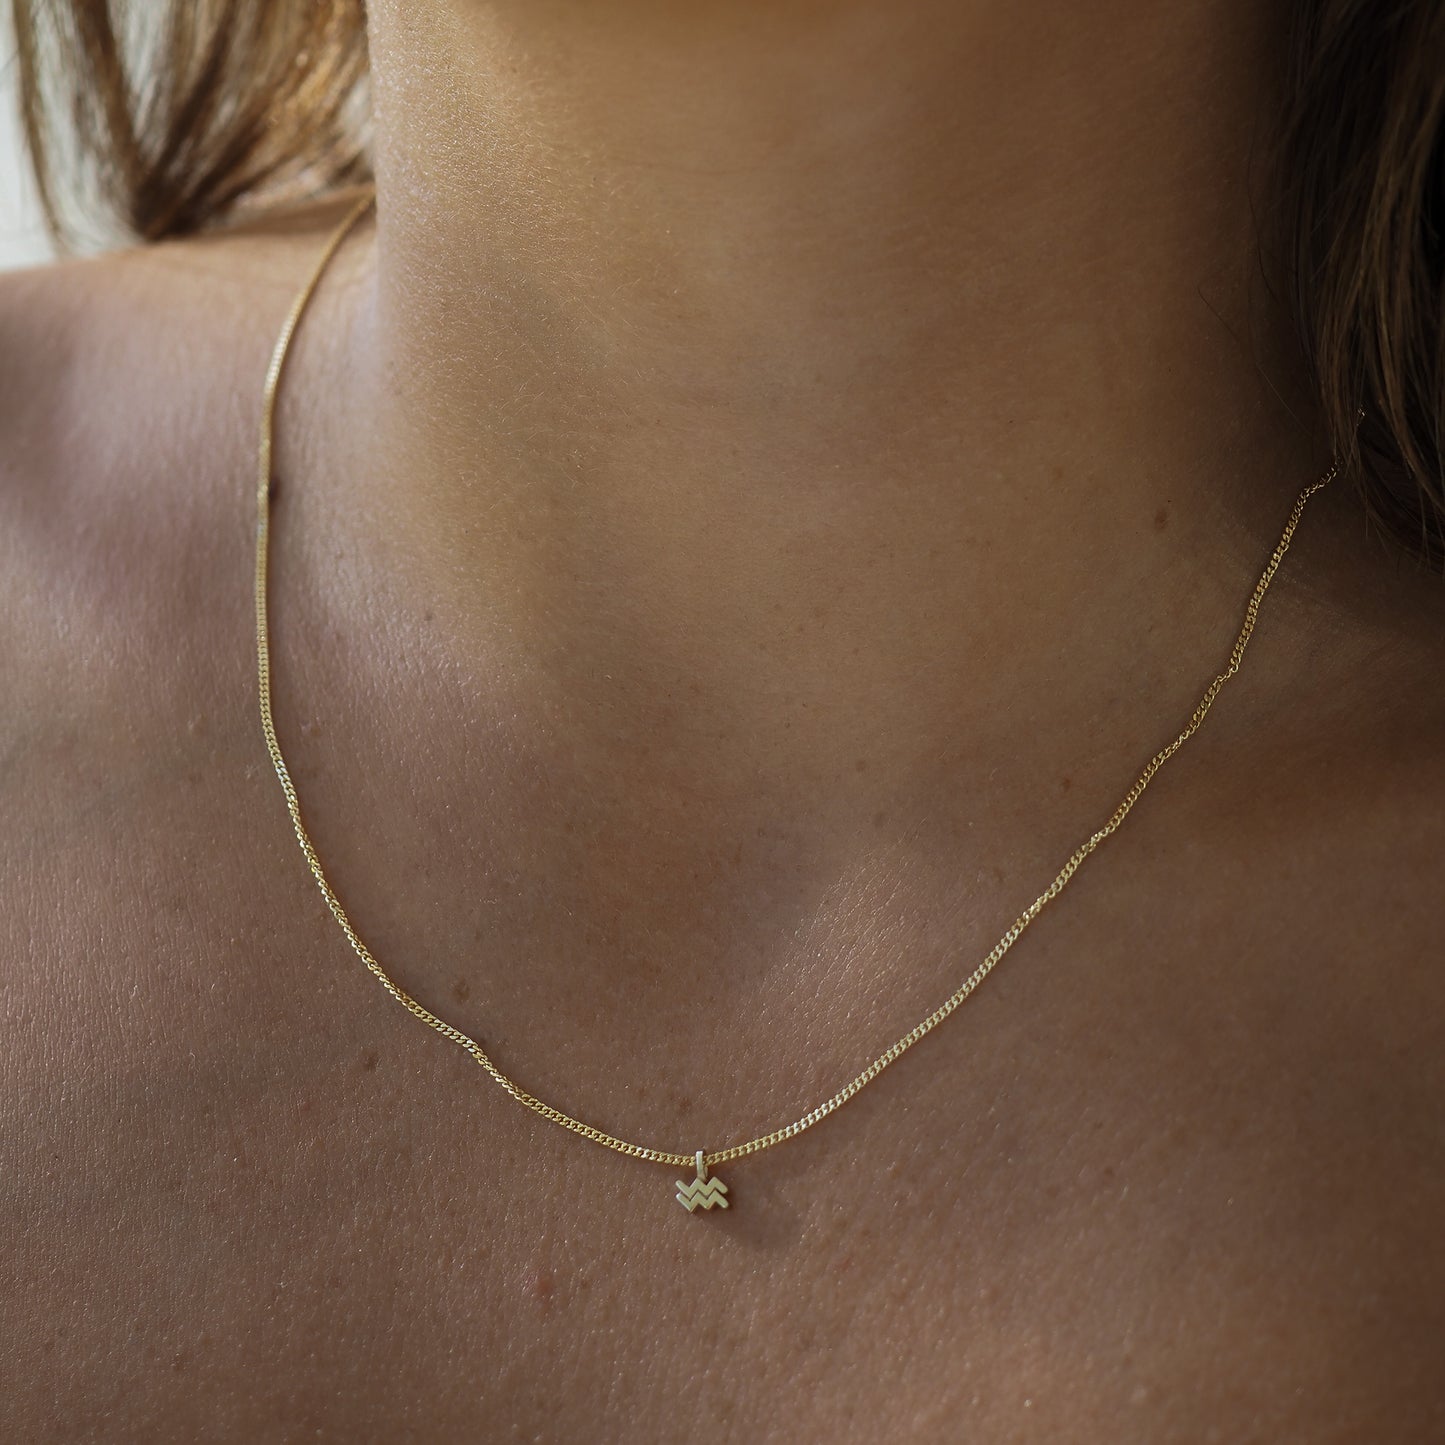 The Zodiac Necklace highlights the symbol among a yellow gold chain. 